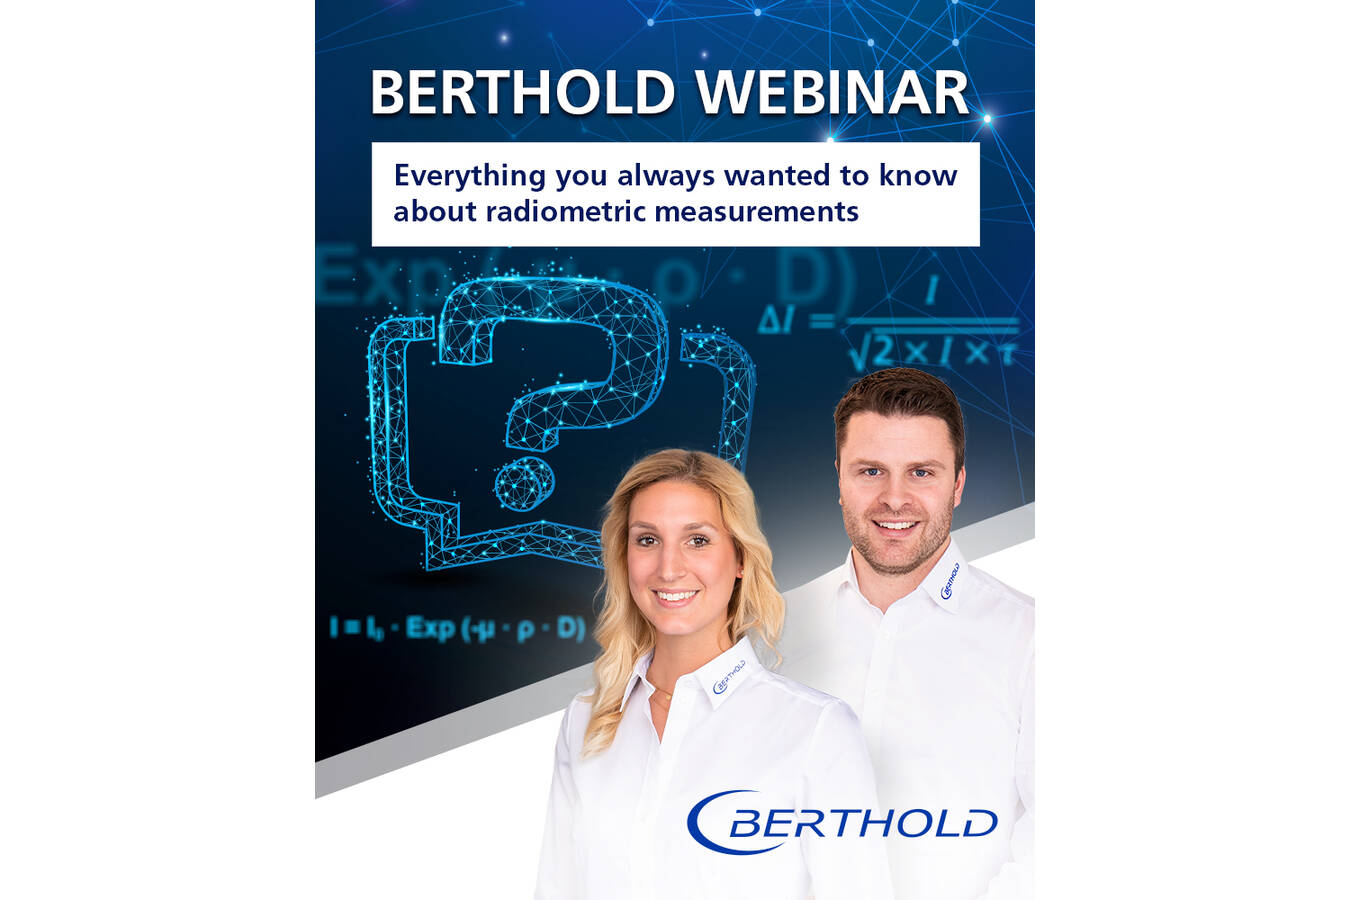 Everything you always wanted to know about radiometric measurements Tuesday, May 11, 2021
OUR EXPERTS from Berthold will answer your all frequently asked radiometry questions related to radiometry. We will explain what you always wanted to know about radiometric measurements in this webinar.
